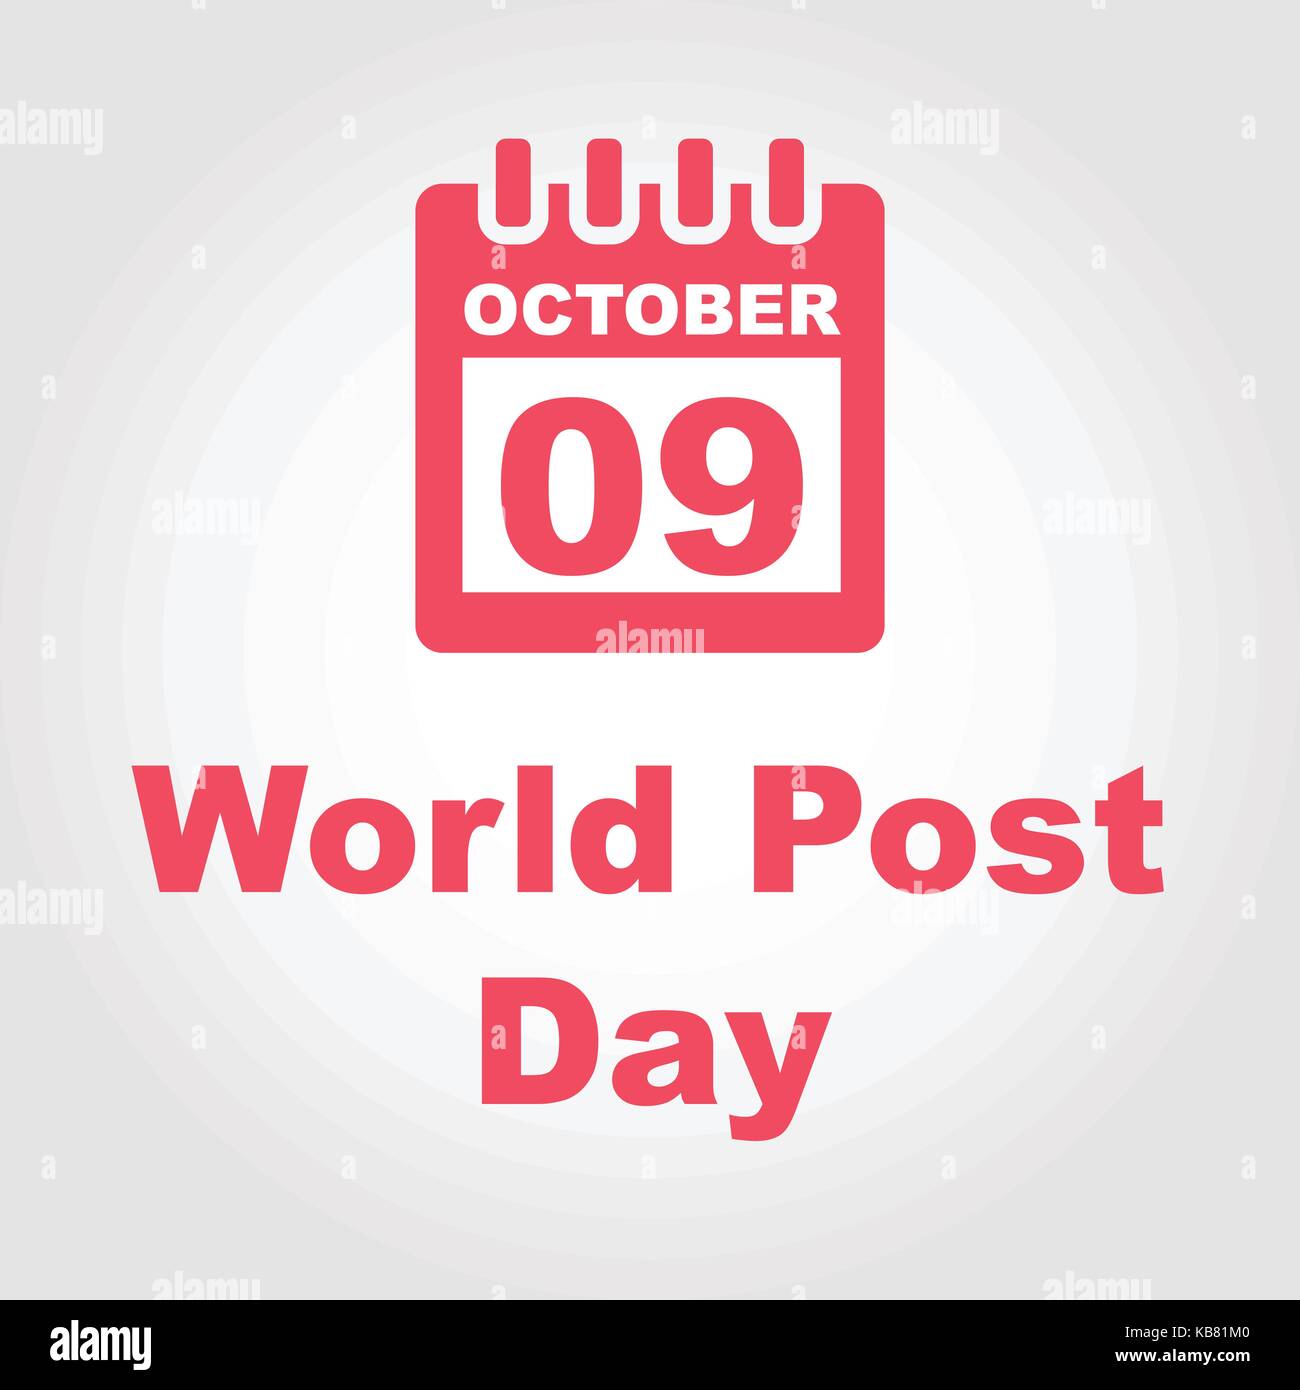 World post day in October with calendar icon - vector illustration Stock Vector